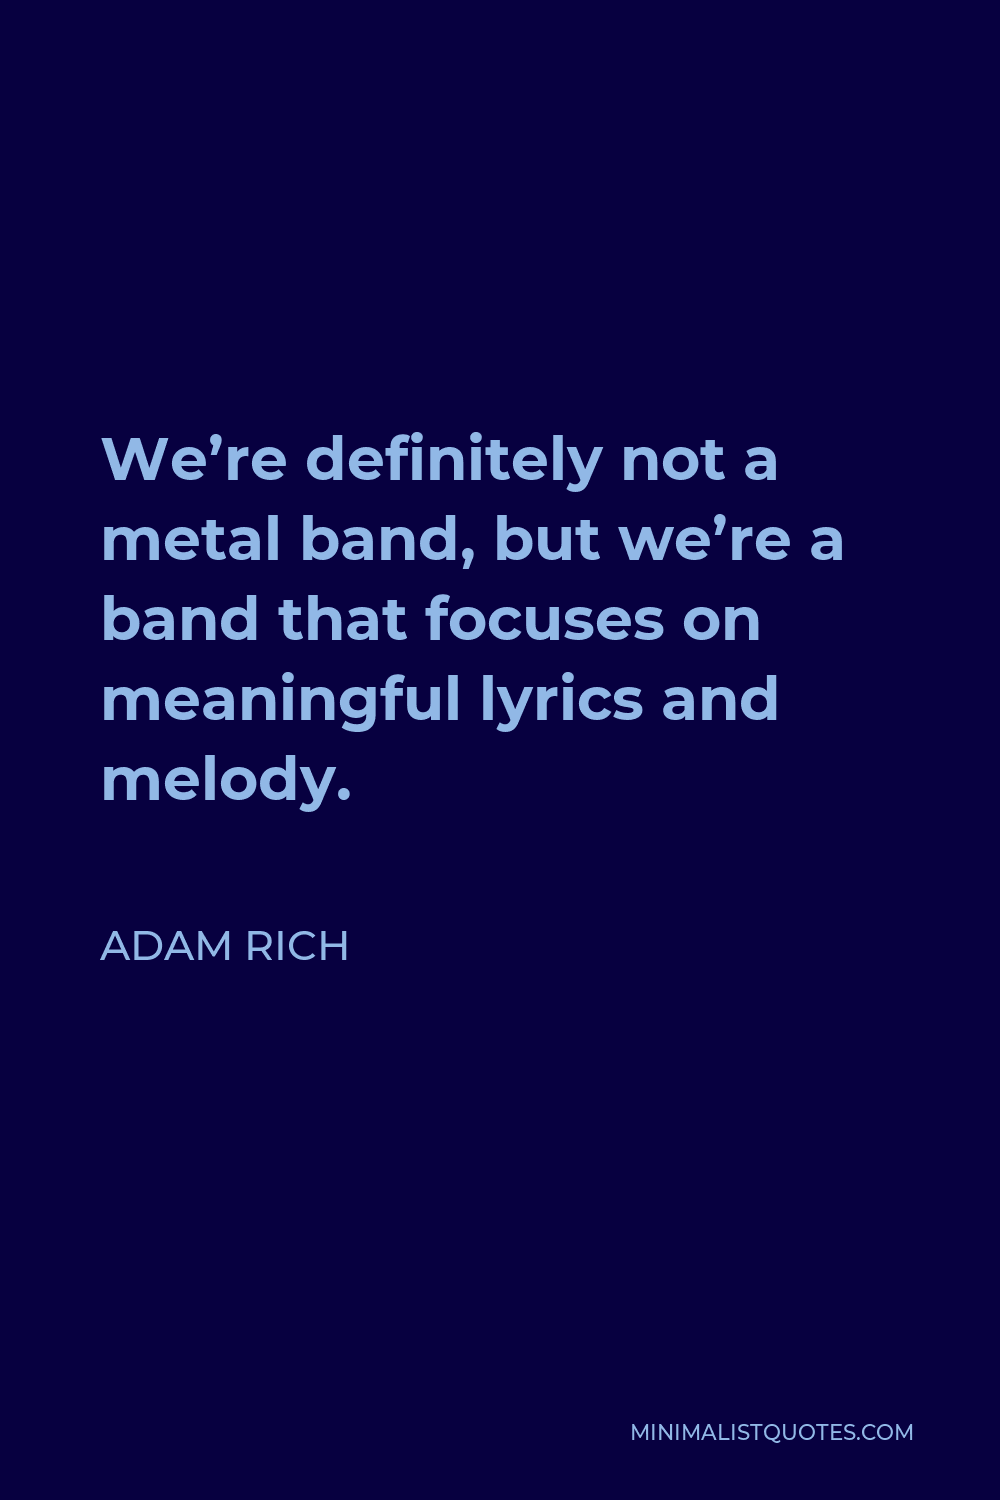 Adam Rich Quote - We’re definitely not a metal band, but we’re a band that focuses on meaningful lyrics and melody.